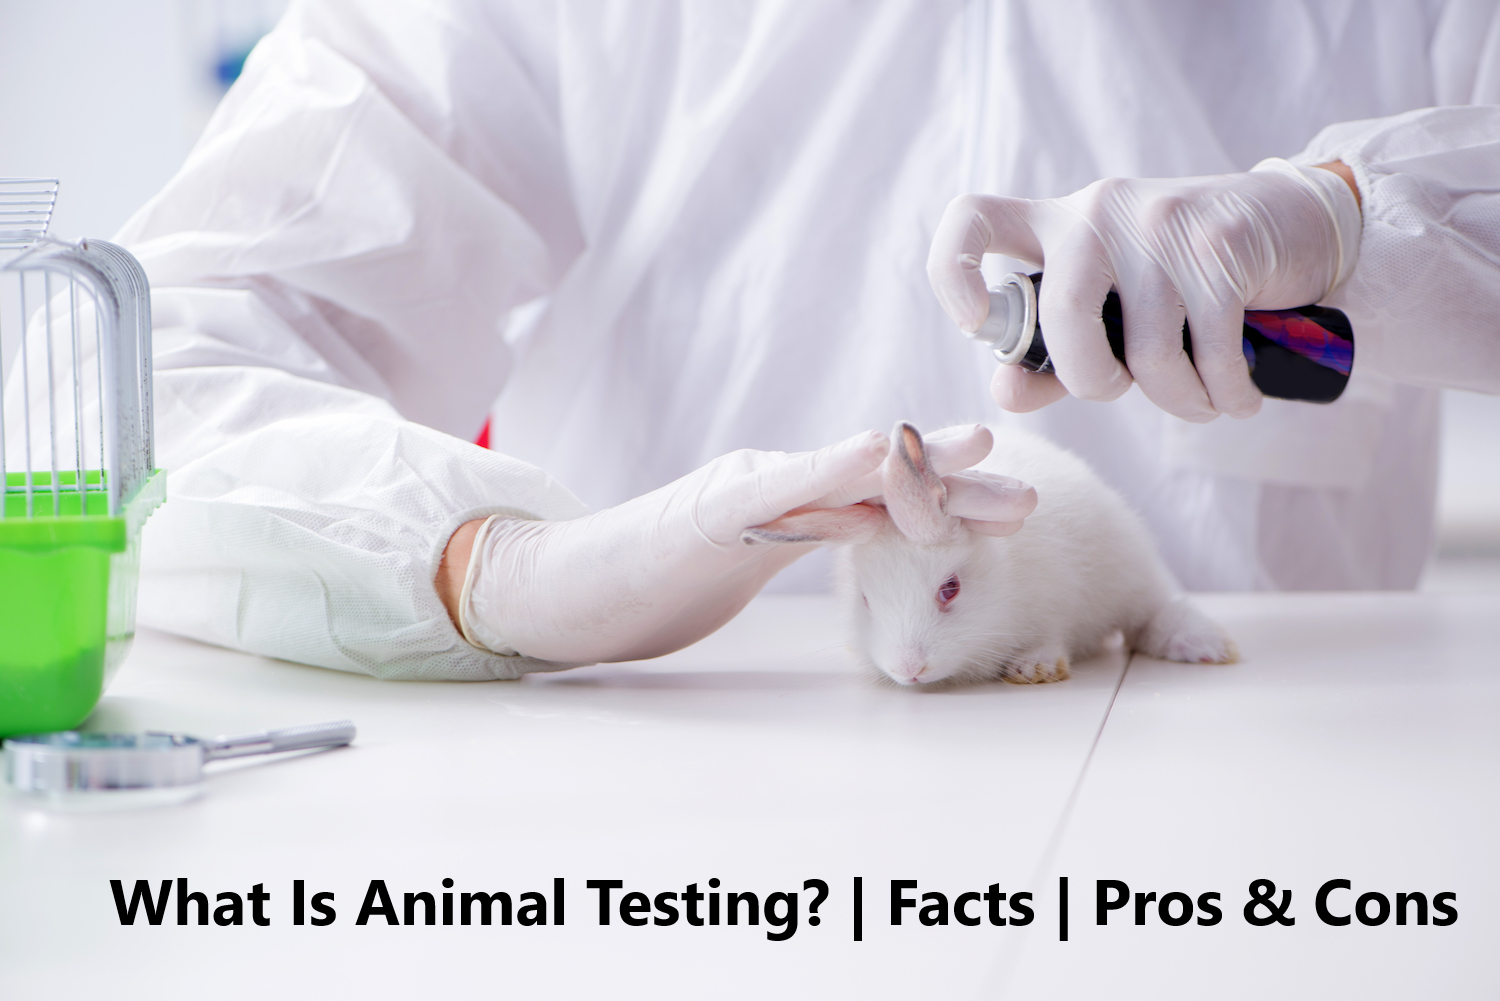 animal experimentation pros and cons